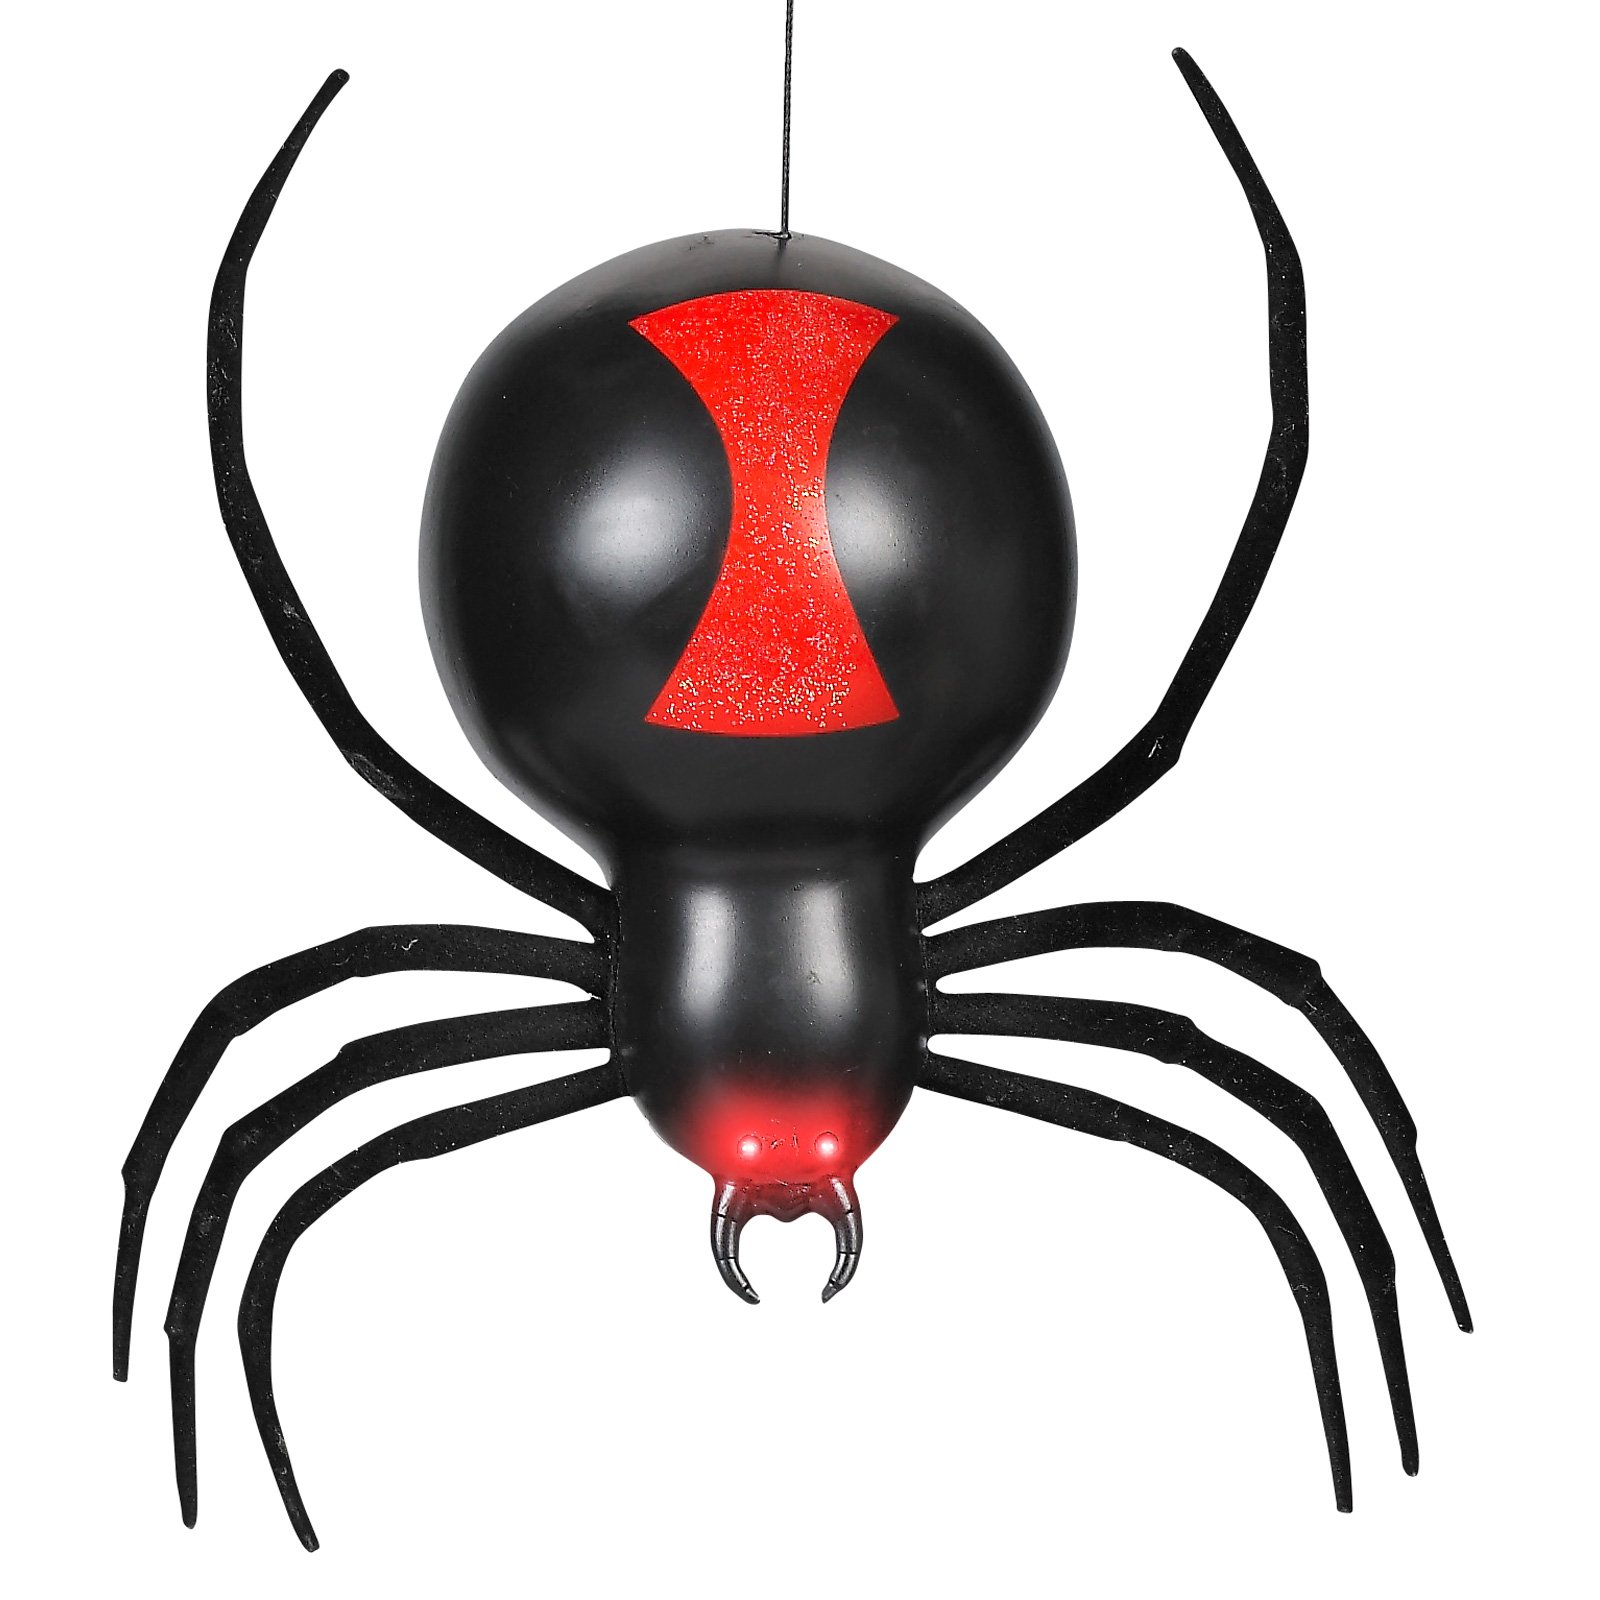 Black Widow Spider Eyes Images & Pictures - Becuo